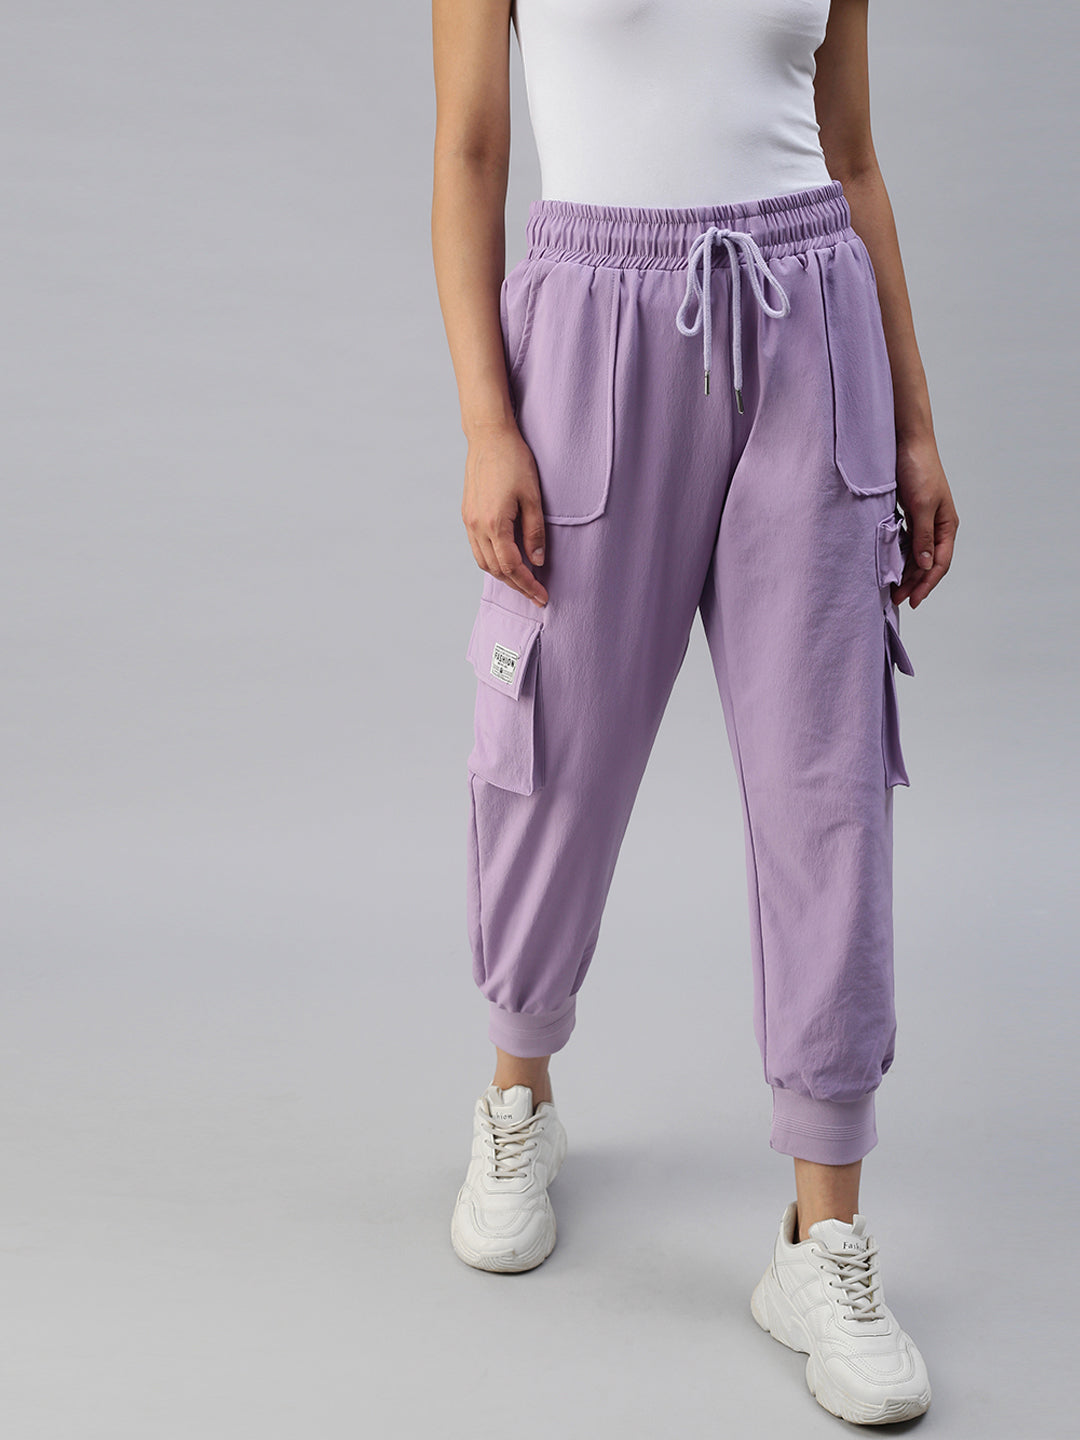 Women's Lavender Solid Joggers Track Pant